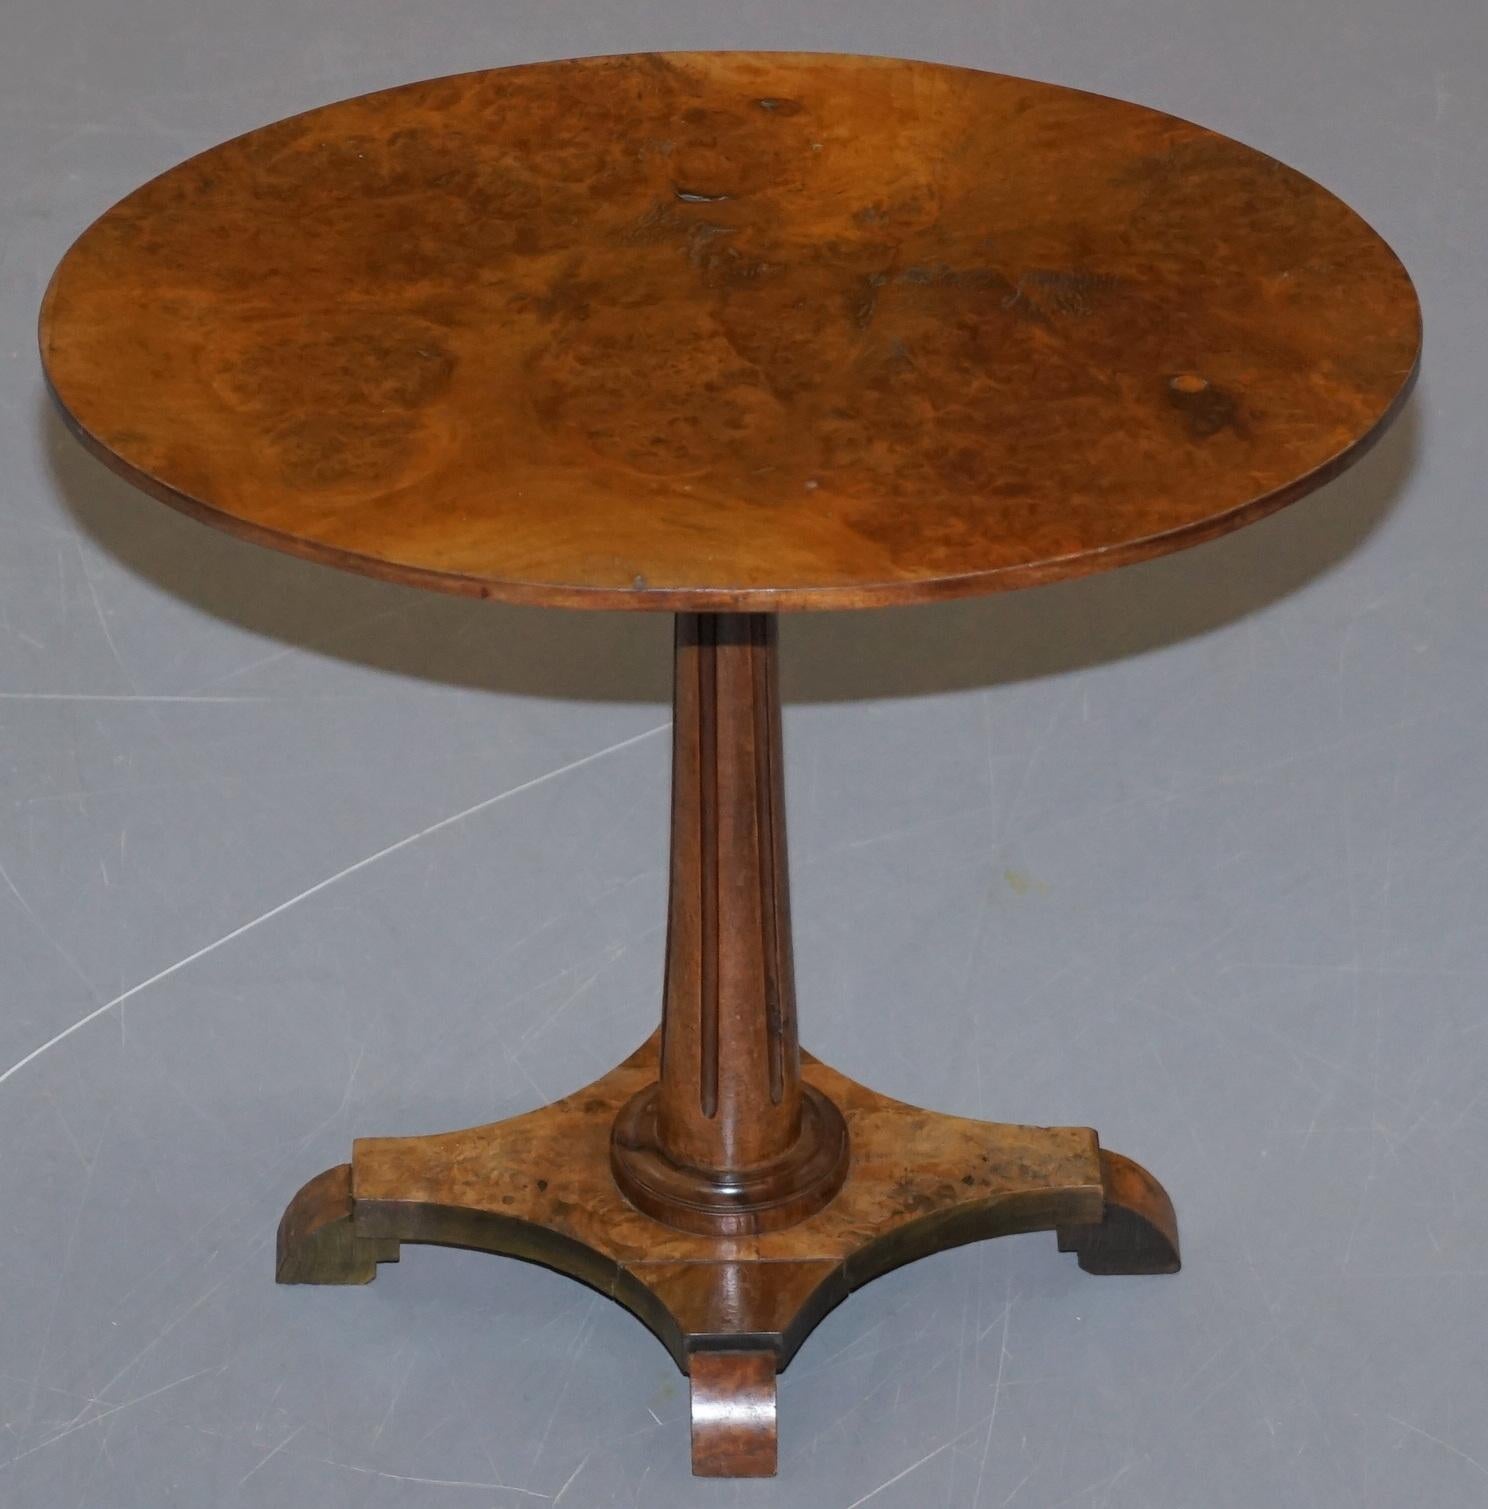 We are delighted to offer for sale this lovely handmade vintage Burr Walnut oval side end lamp table with stunning timber patina

A very good looking piece, the legs are Regency style scroll, they lead on to a tapered and fluted column base, the